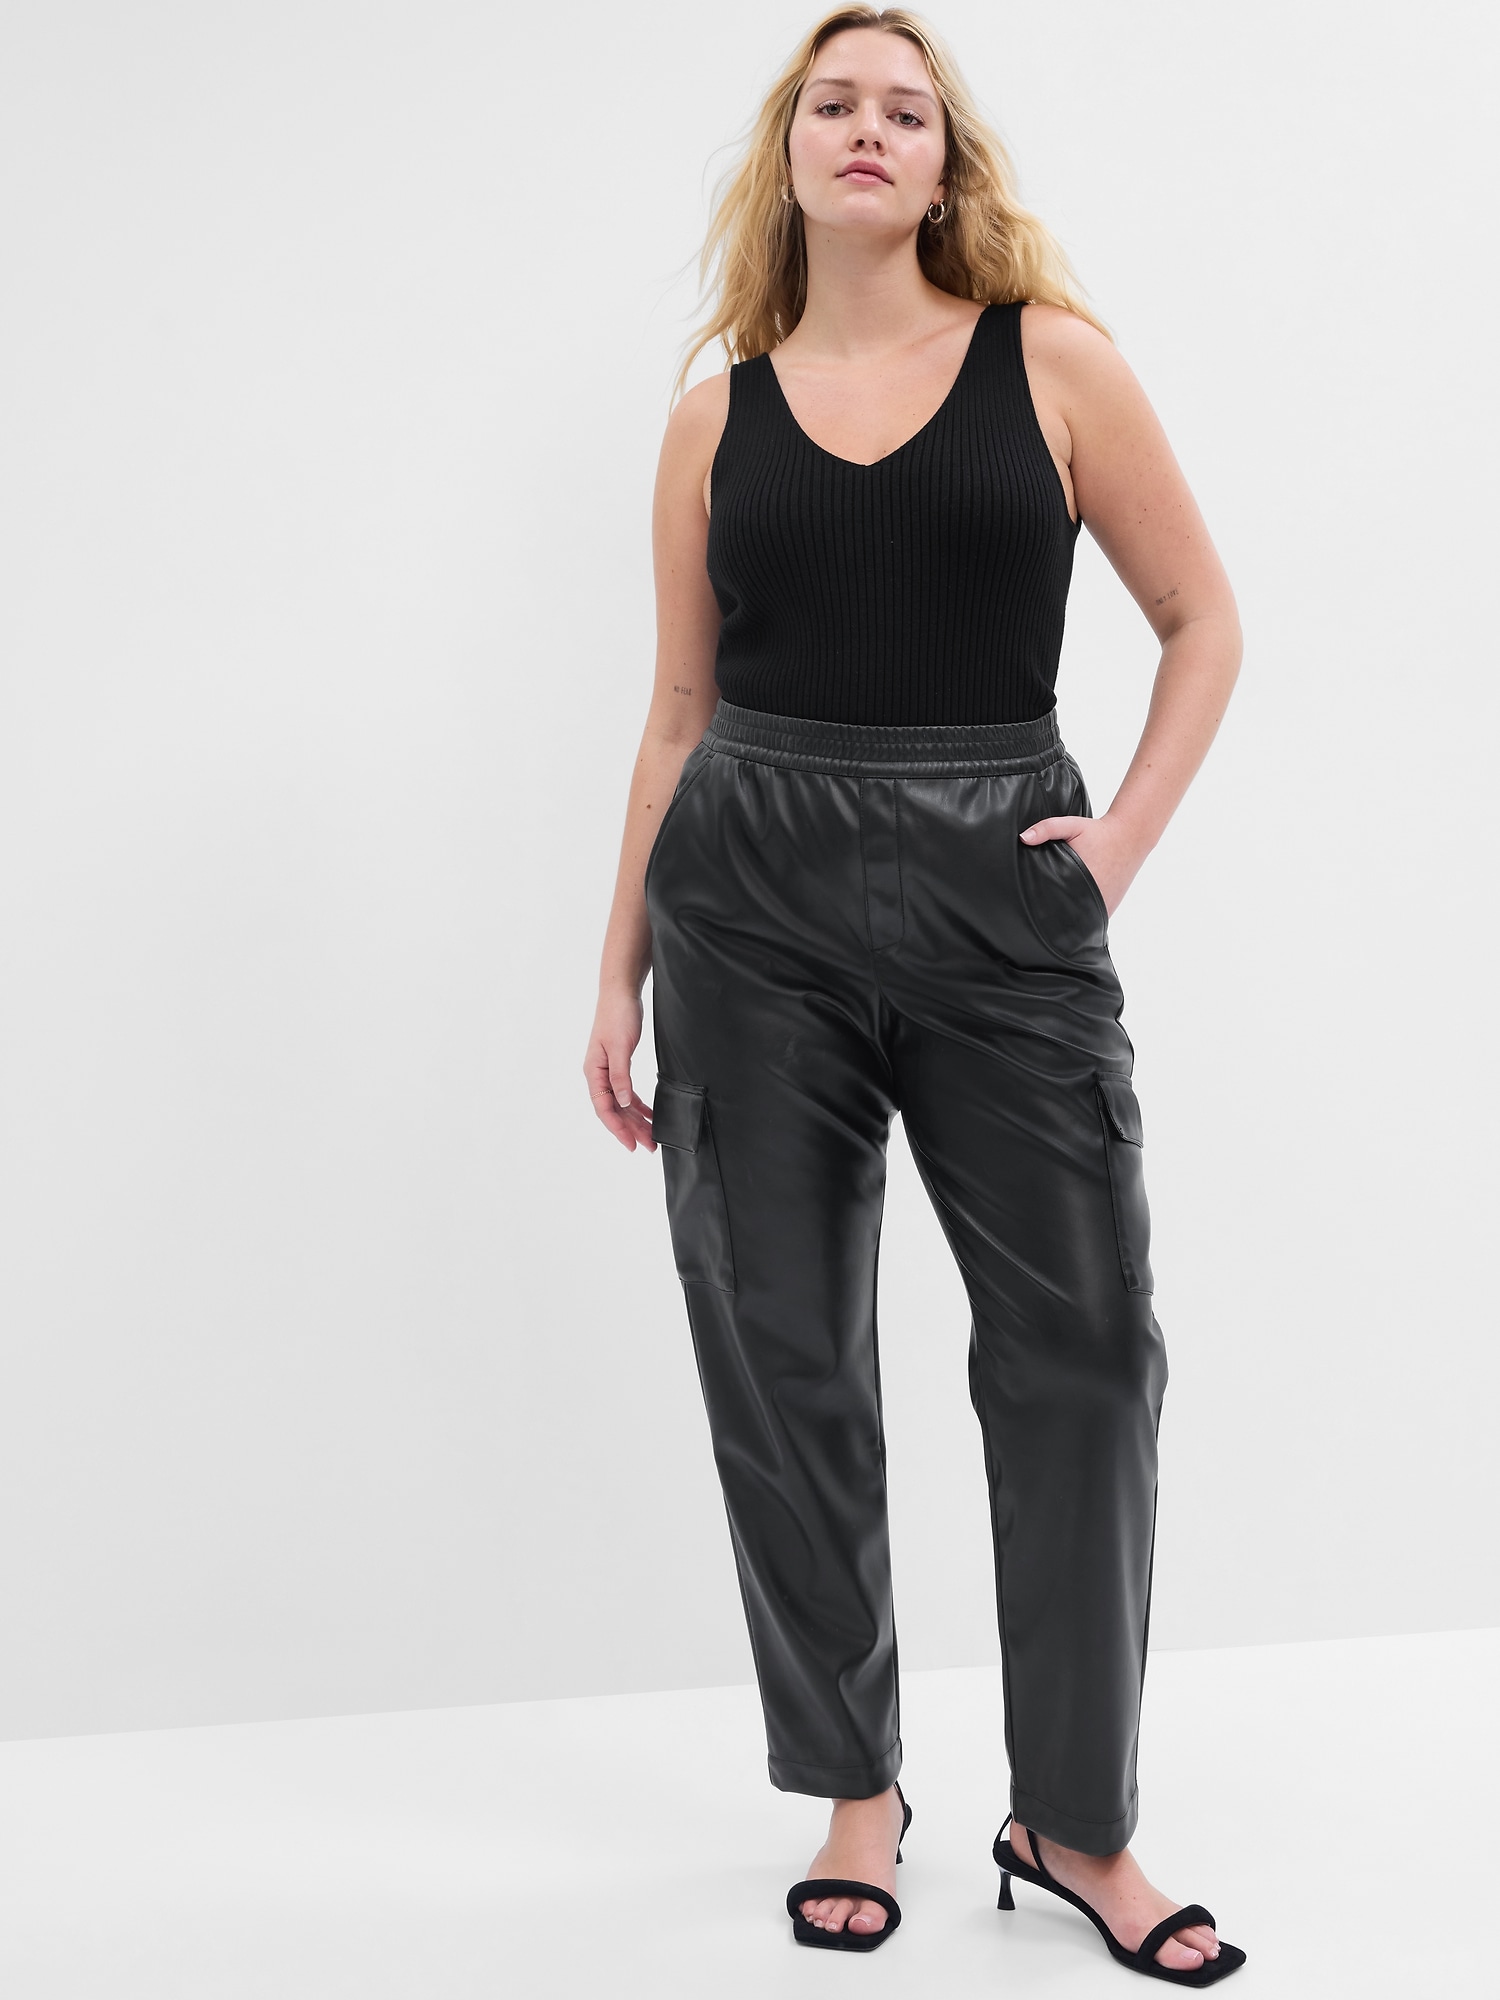 Alara Faux Leather Pant at Joie